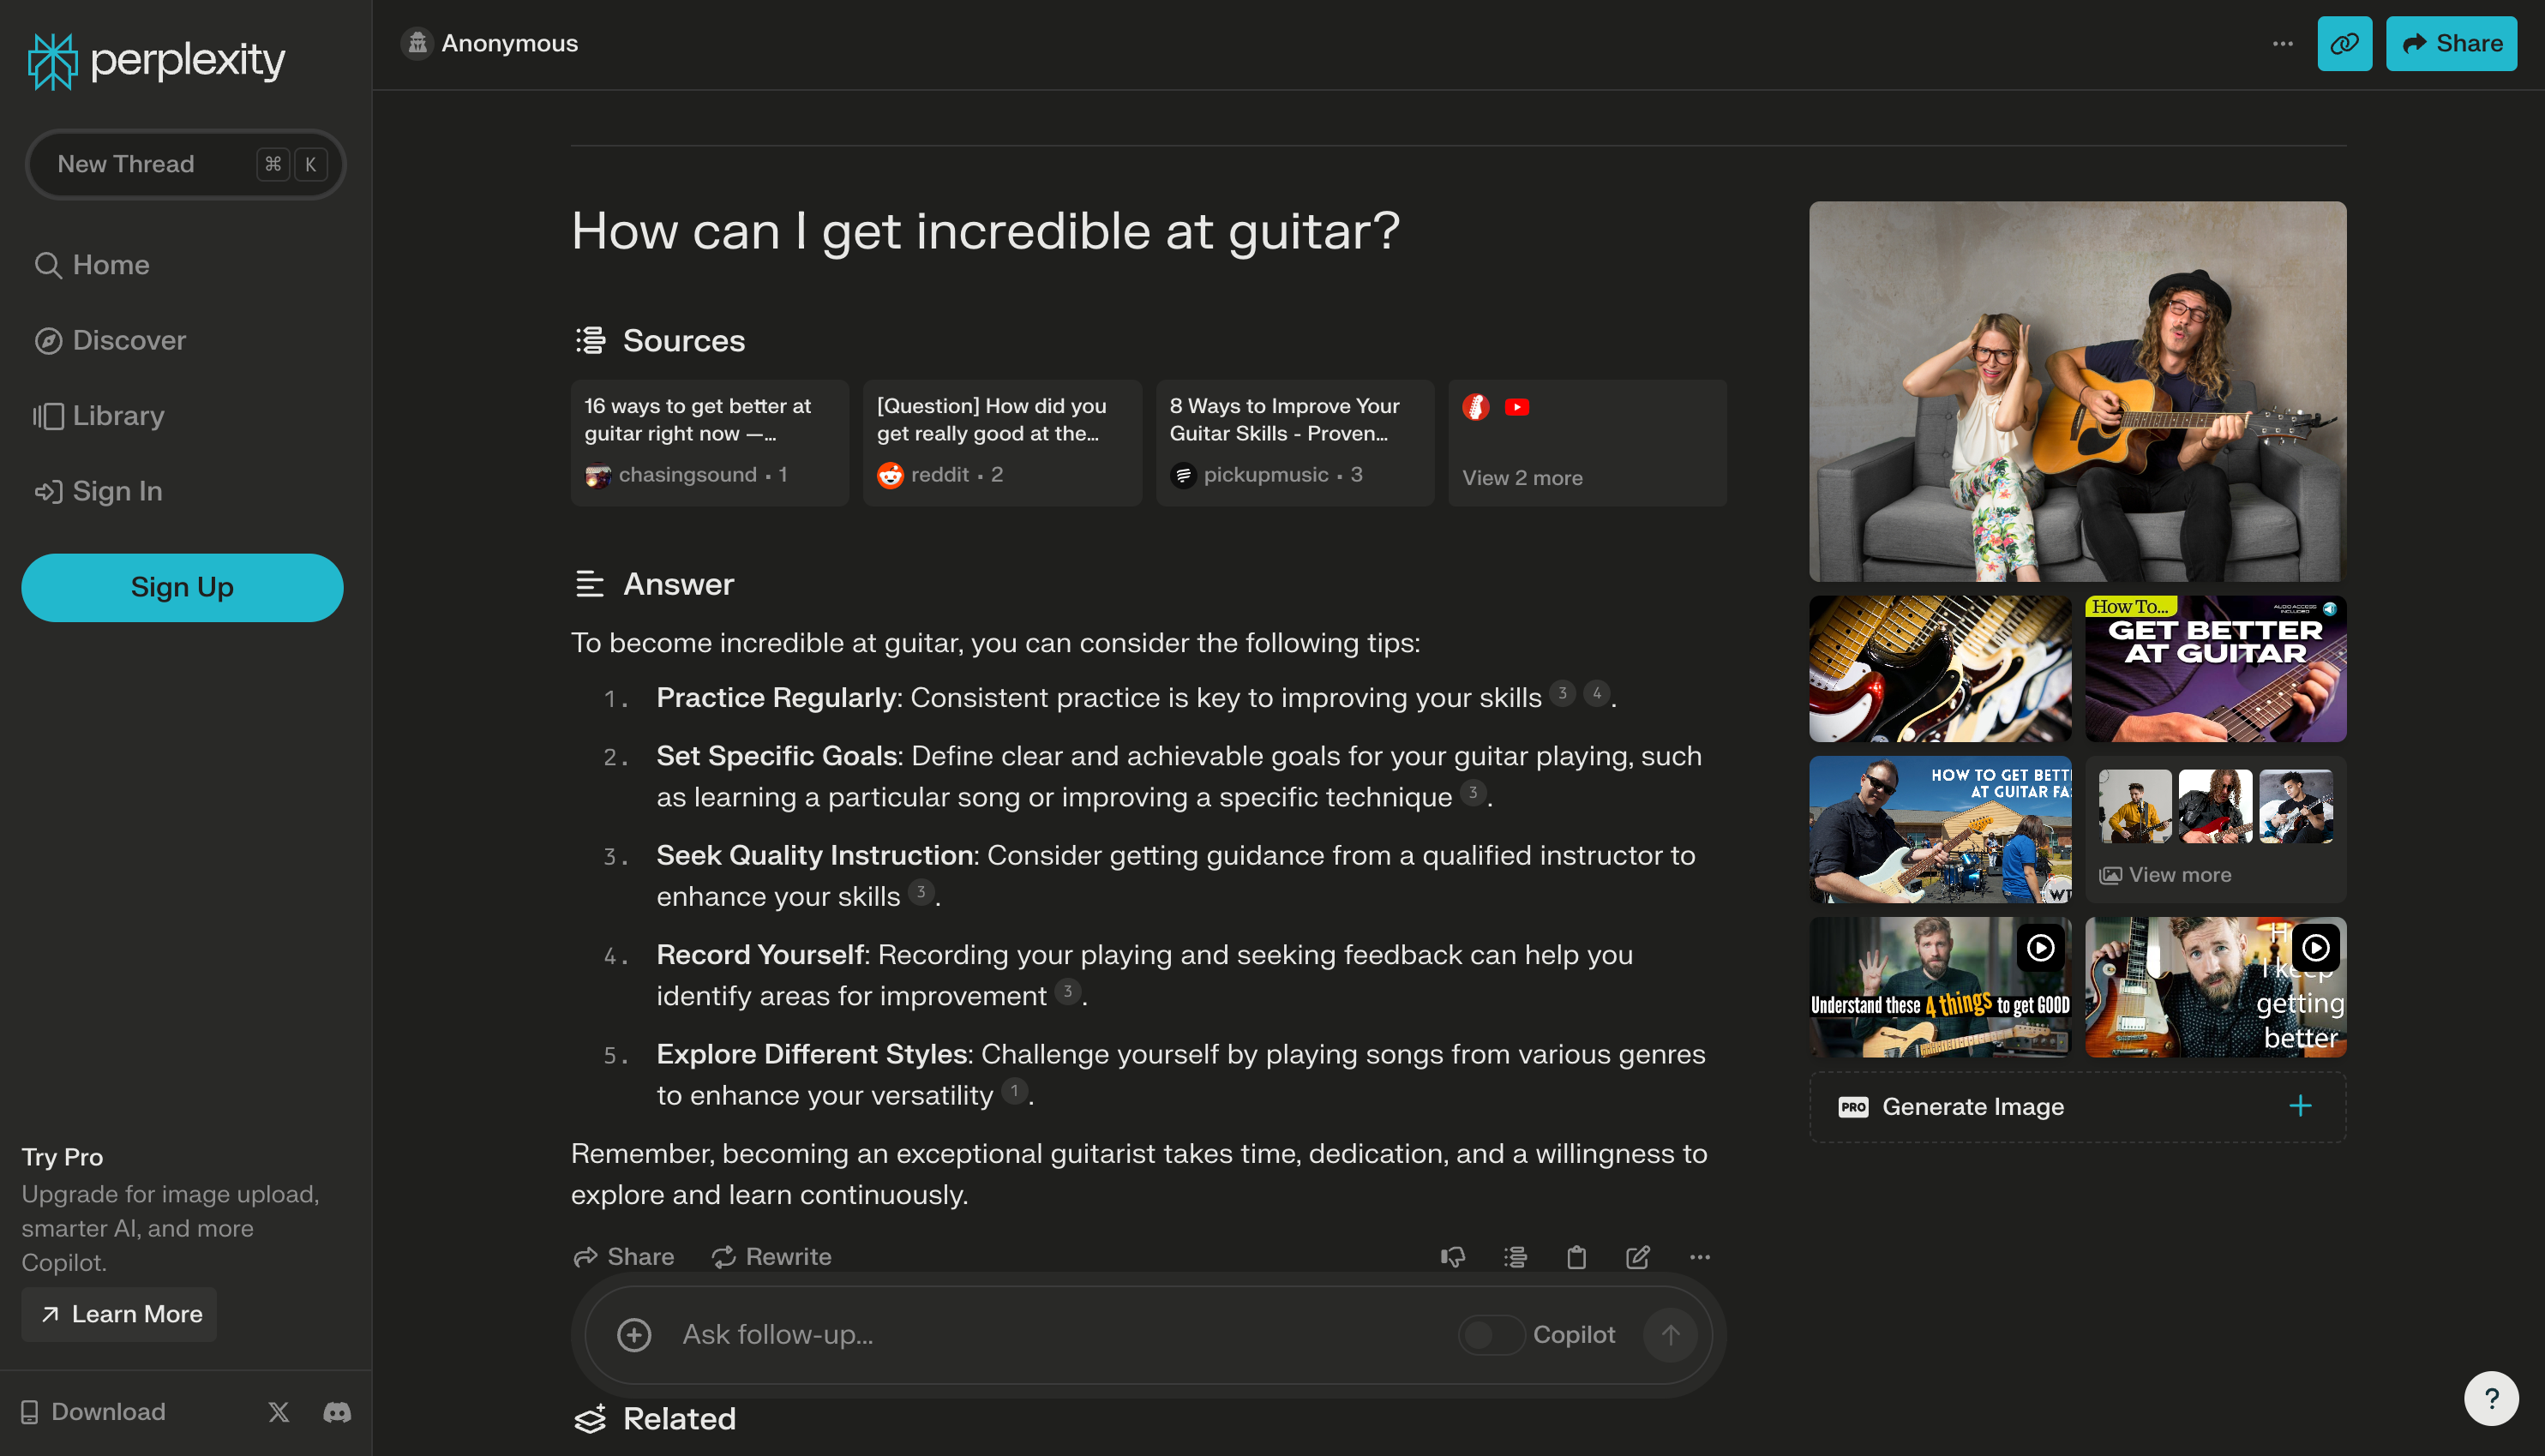 Perplexity AI search engine dashboard, showing a search result for 'How to get incredible at guitar'